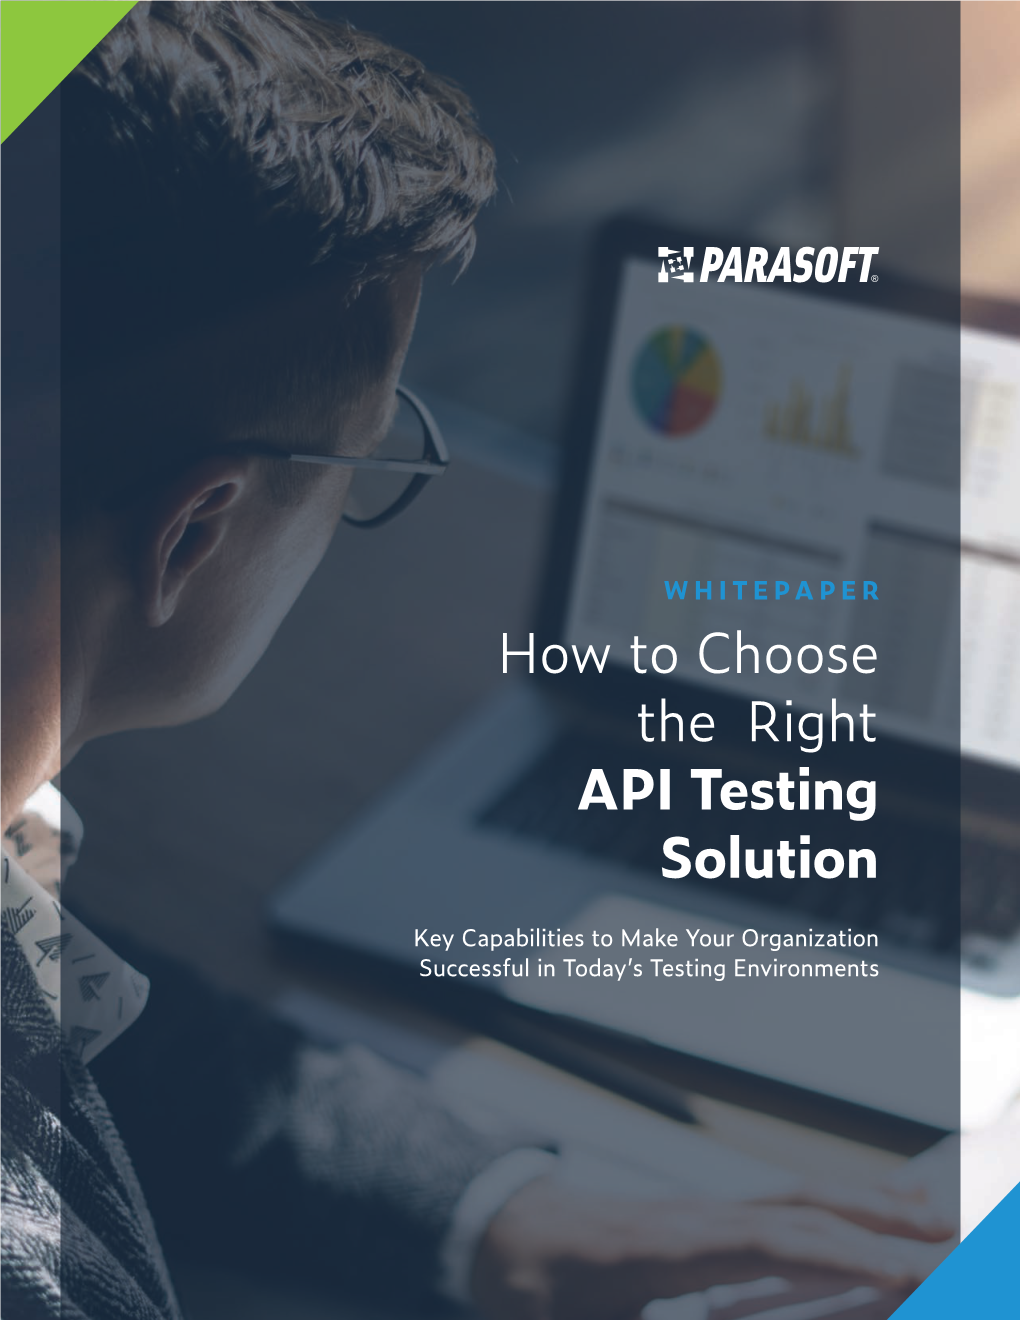 How to Choose the Right API Testing Solution